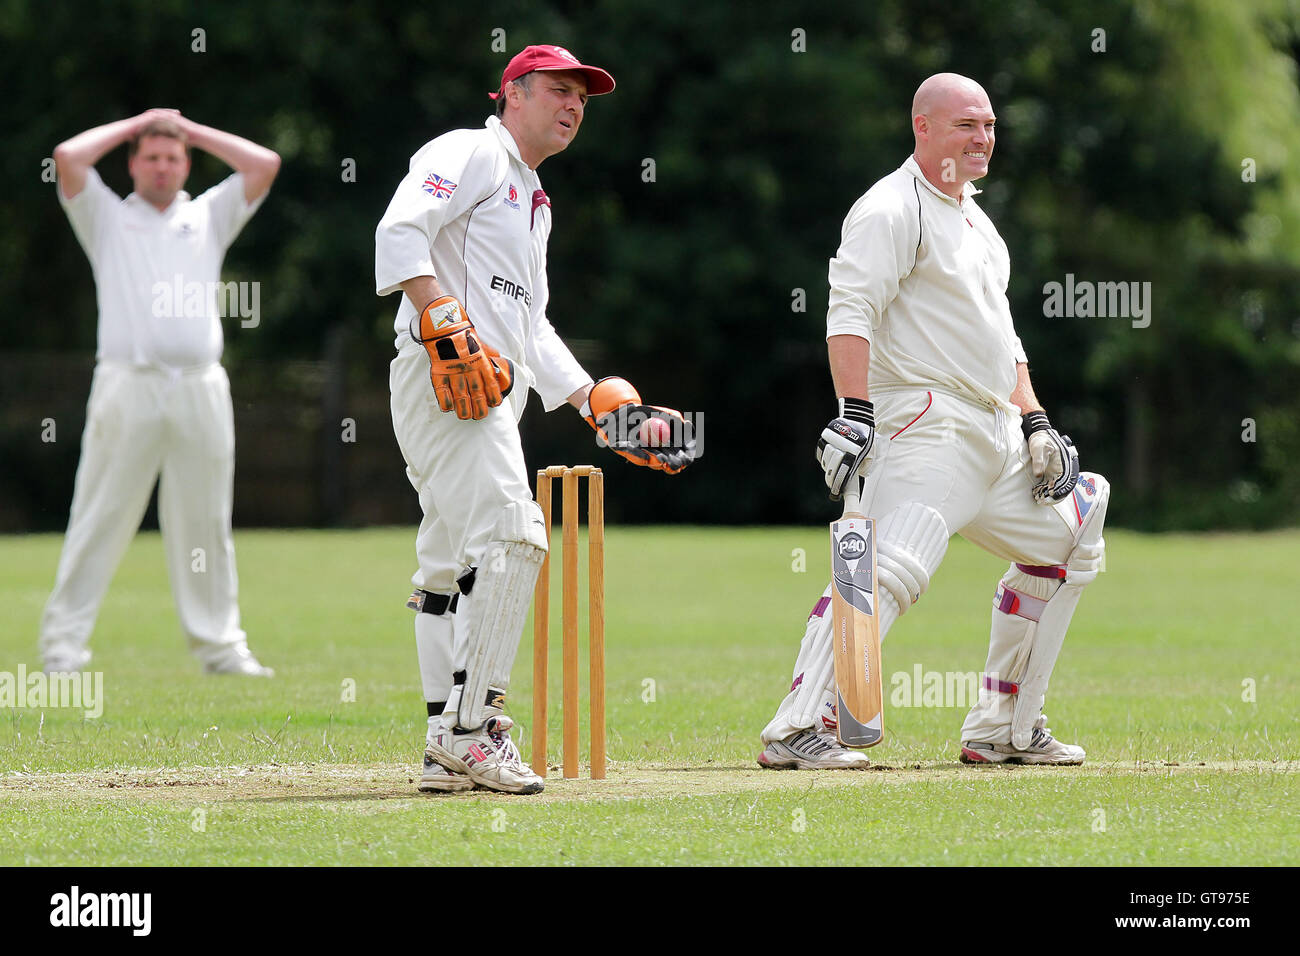 Danny Jones of Hornchurch survives a close shave - Hornchurch CC 5th XI vs Upminster CC 6th XI - Essex Cricket League at Met Police Sports Ground, Chigwell - 25/06/11 Stock Photo